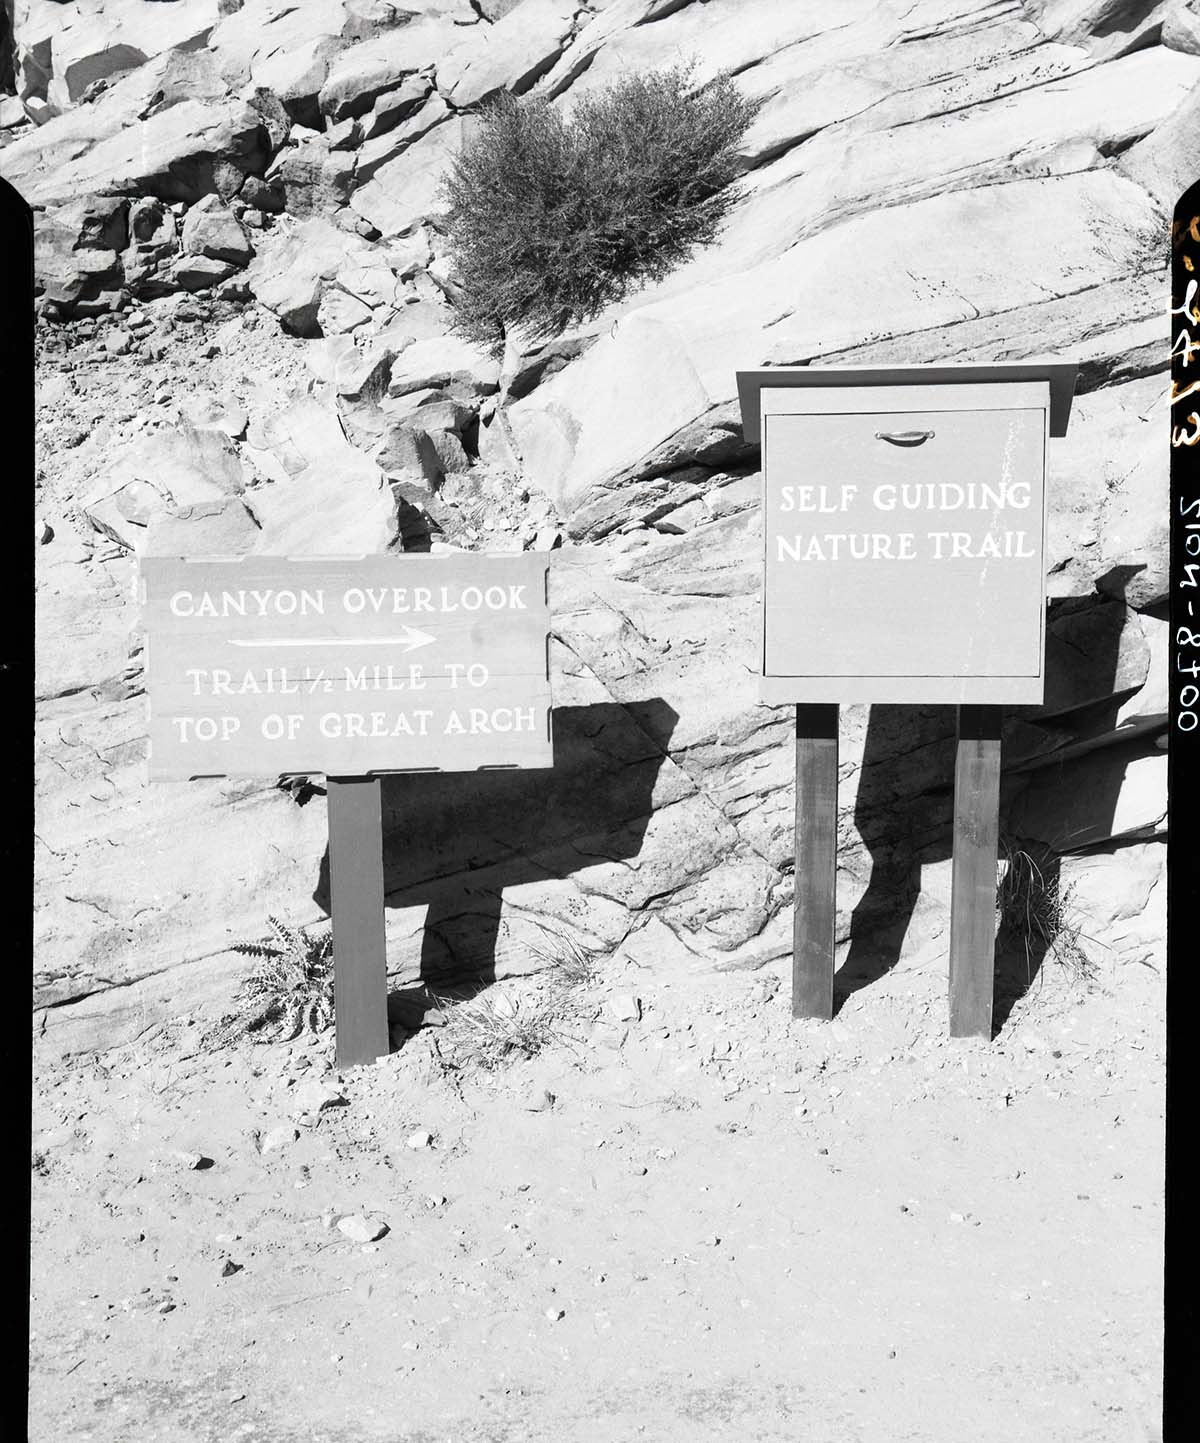 Leaflet box for self-guiding nature trail, Canyon Overlook.